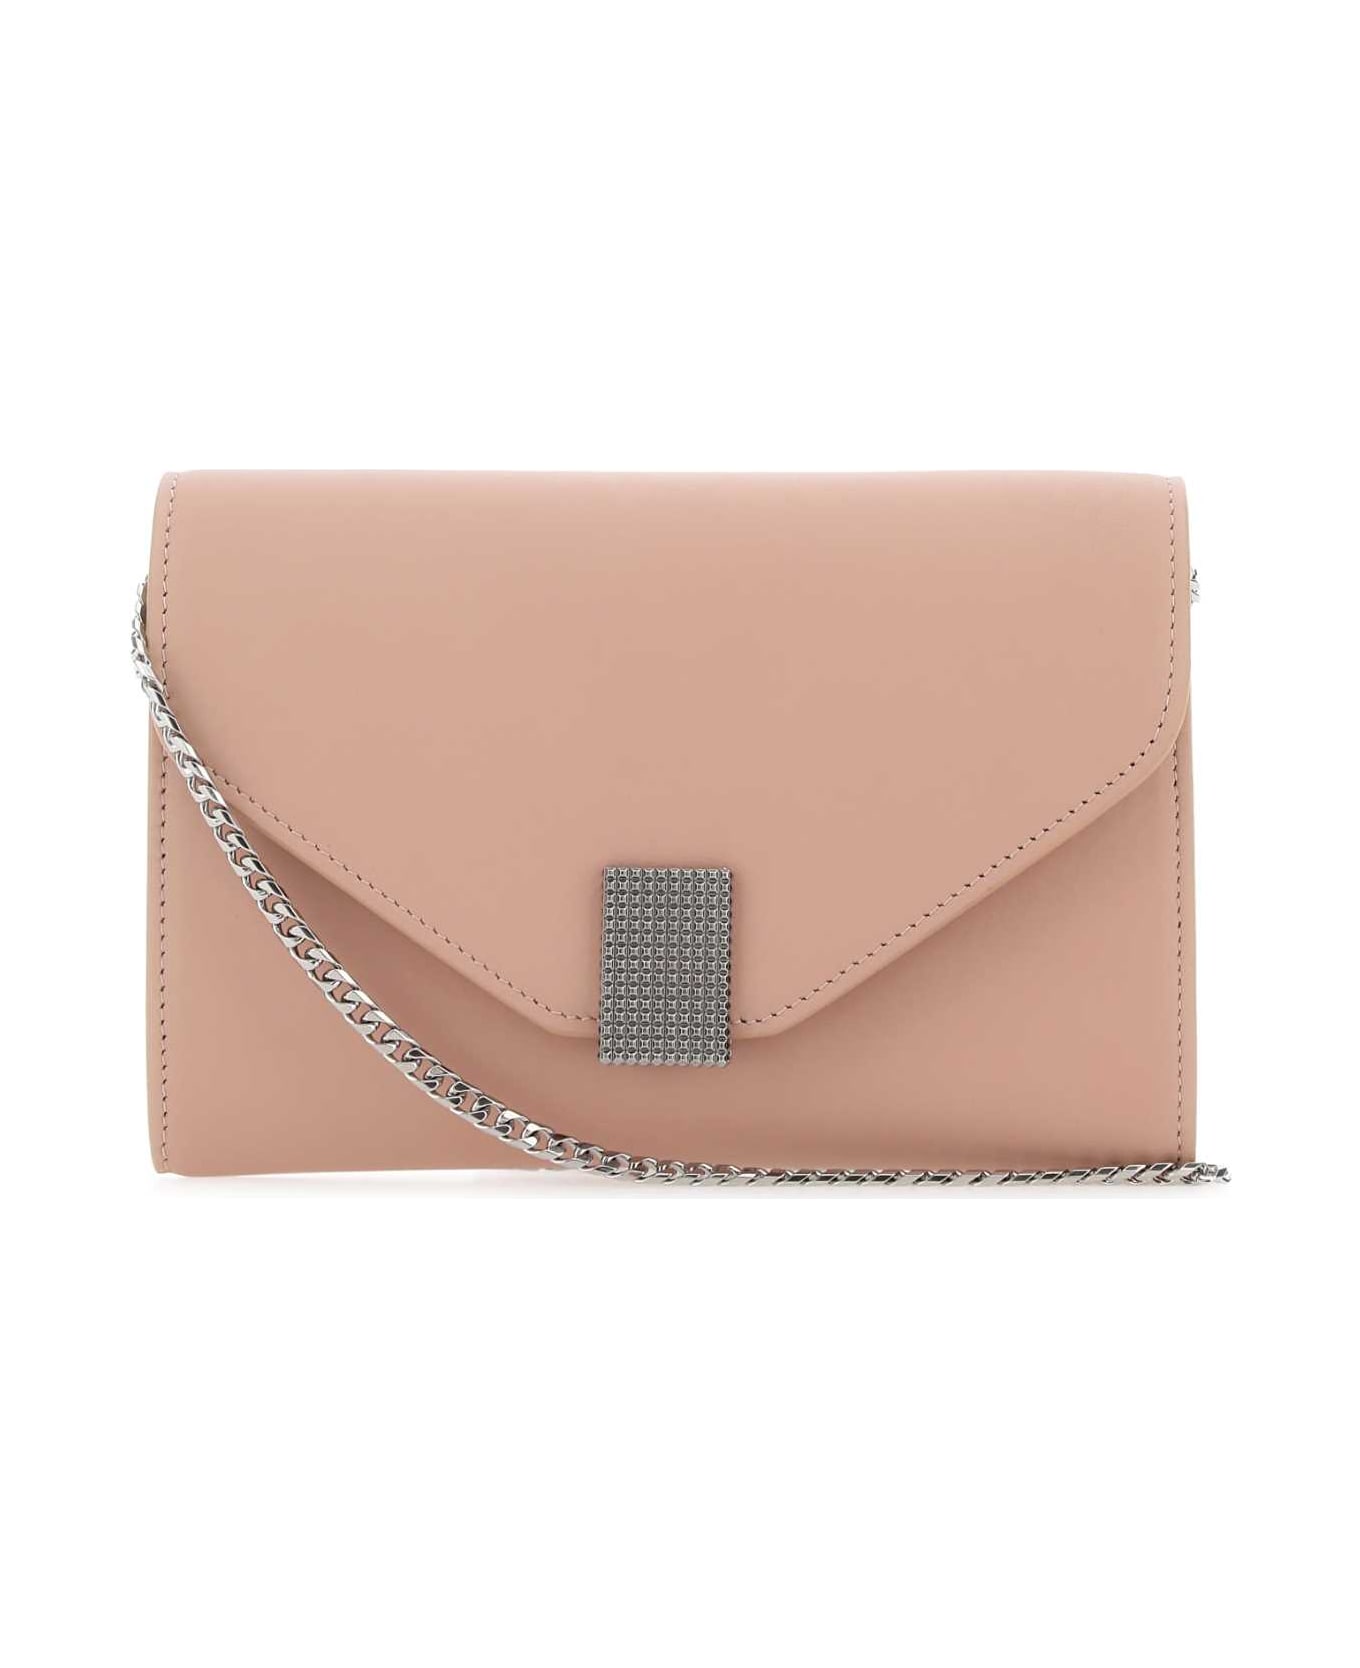 Lanvin Antiqued Pink Leather Concerto Clutch - Pink クラッチバッグ